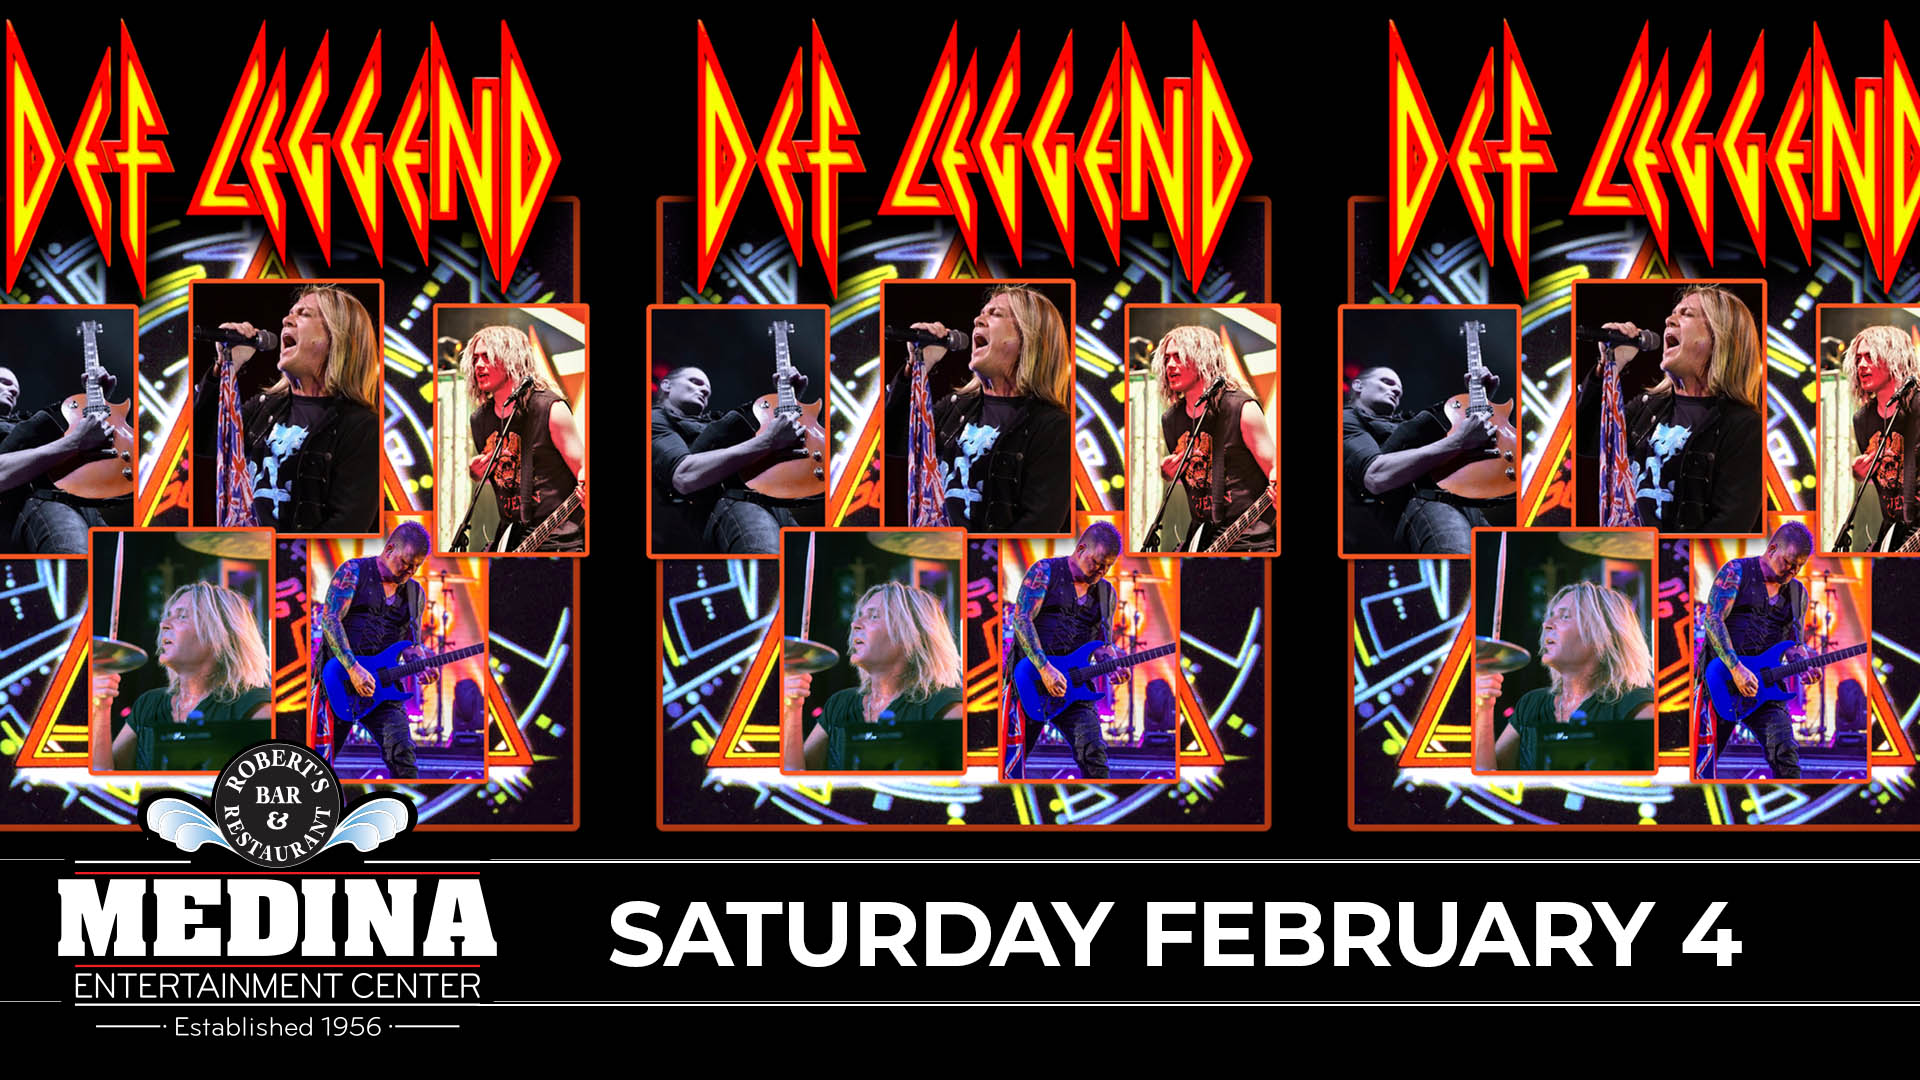 DEF LEGGEND Def Leppard Tribute with guest HEARTLESS Medina Entertainment Center Saturday, February 4, 2023 Doors: 7:00 PM | Music: 8:00 PM | 21+ GA Ticket Prices: $17 Advance / $22 Day Of Show plus applicable fees